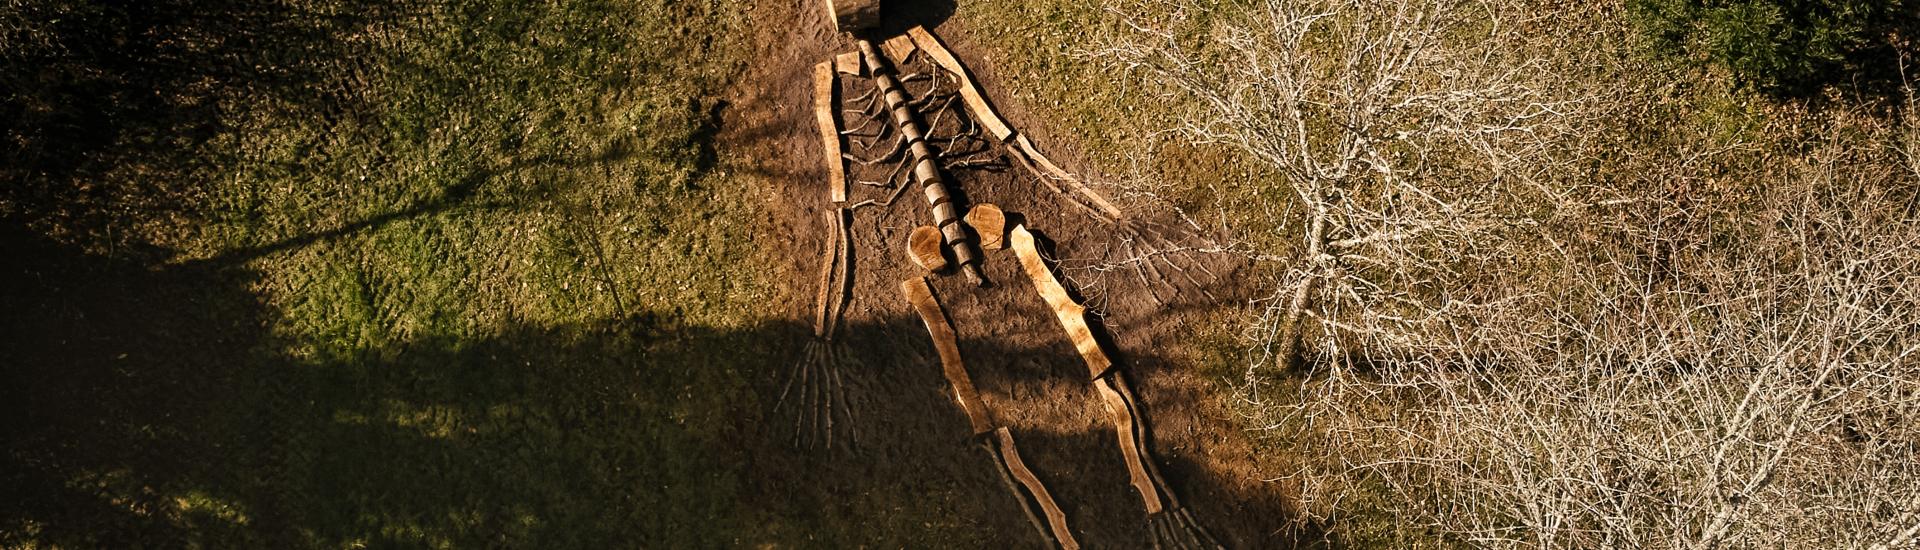 Aerial view of a giant stick skeleton sculpture